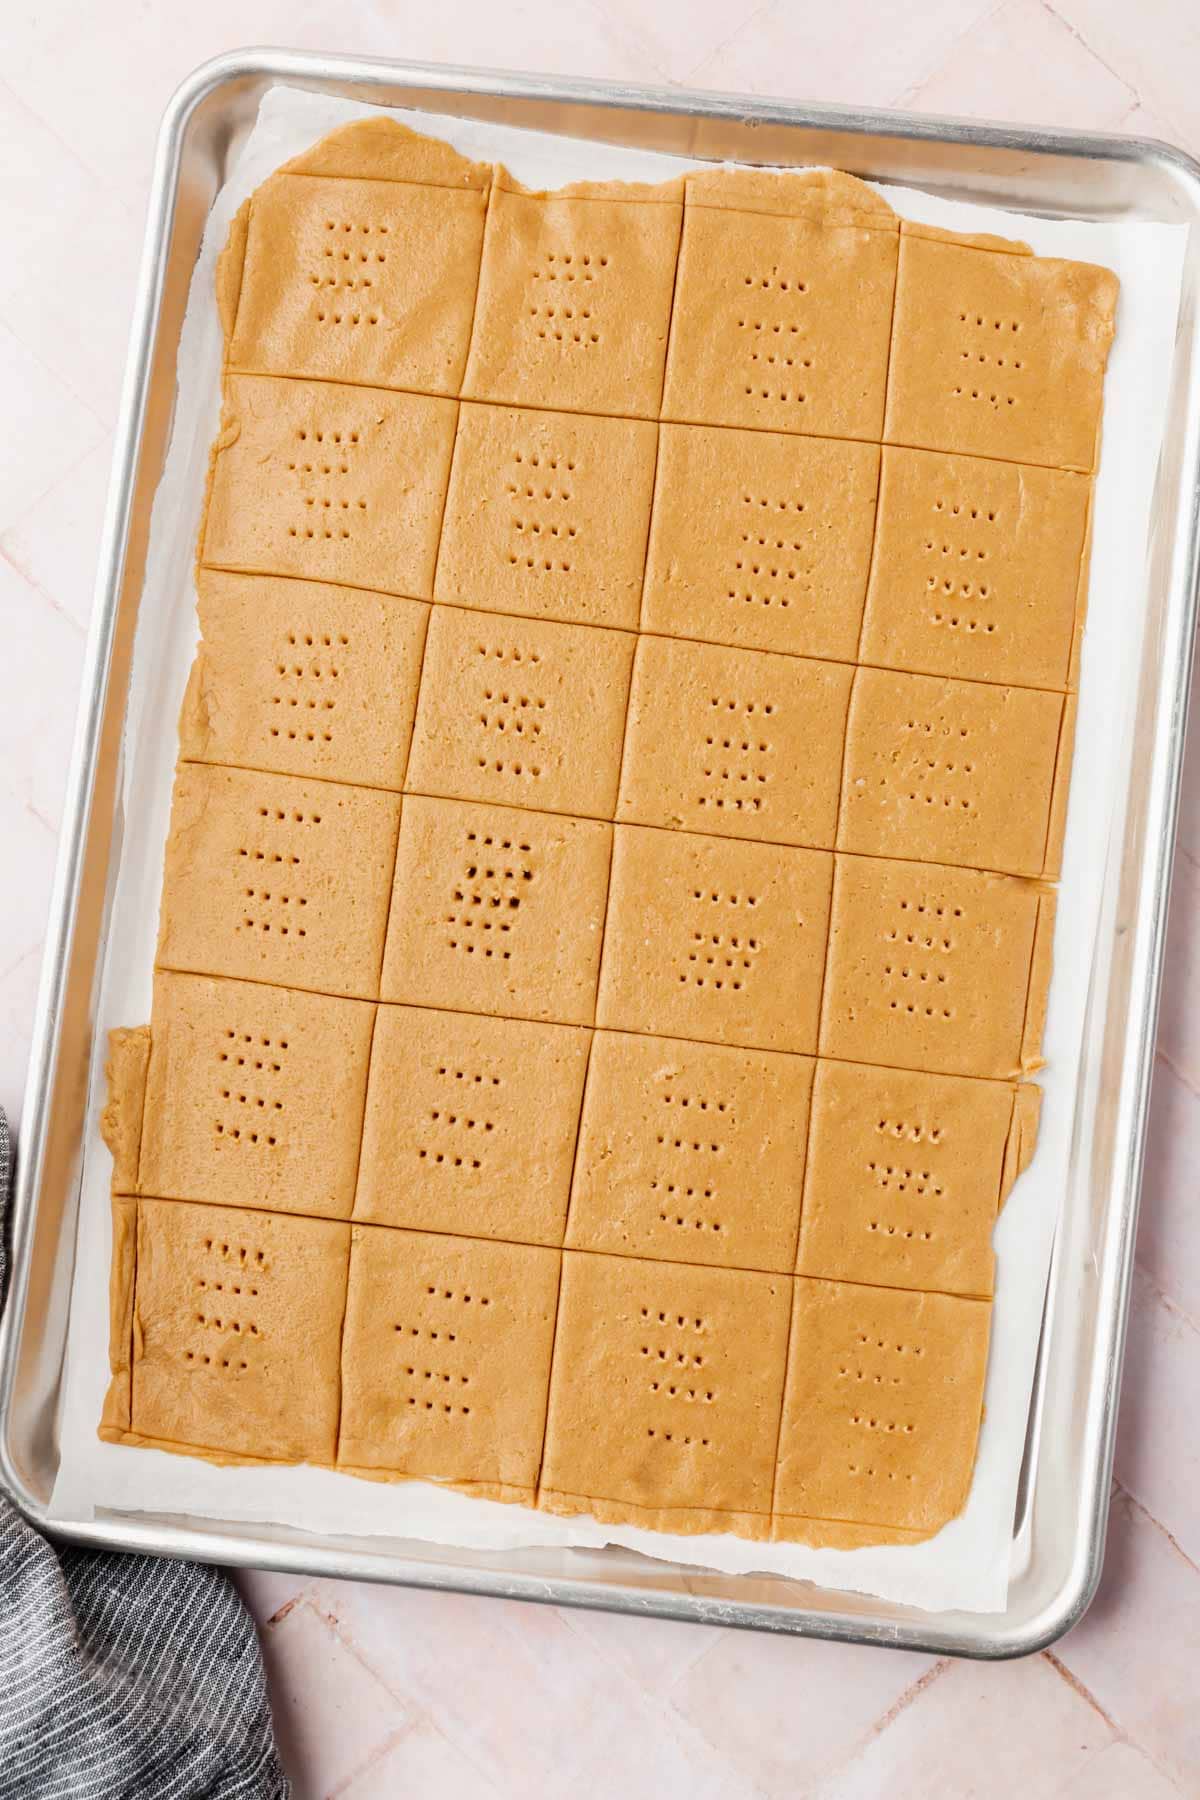 Graham cracker dough cut into squares on top of a baking sheet ready for baking.